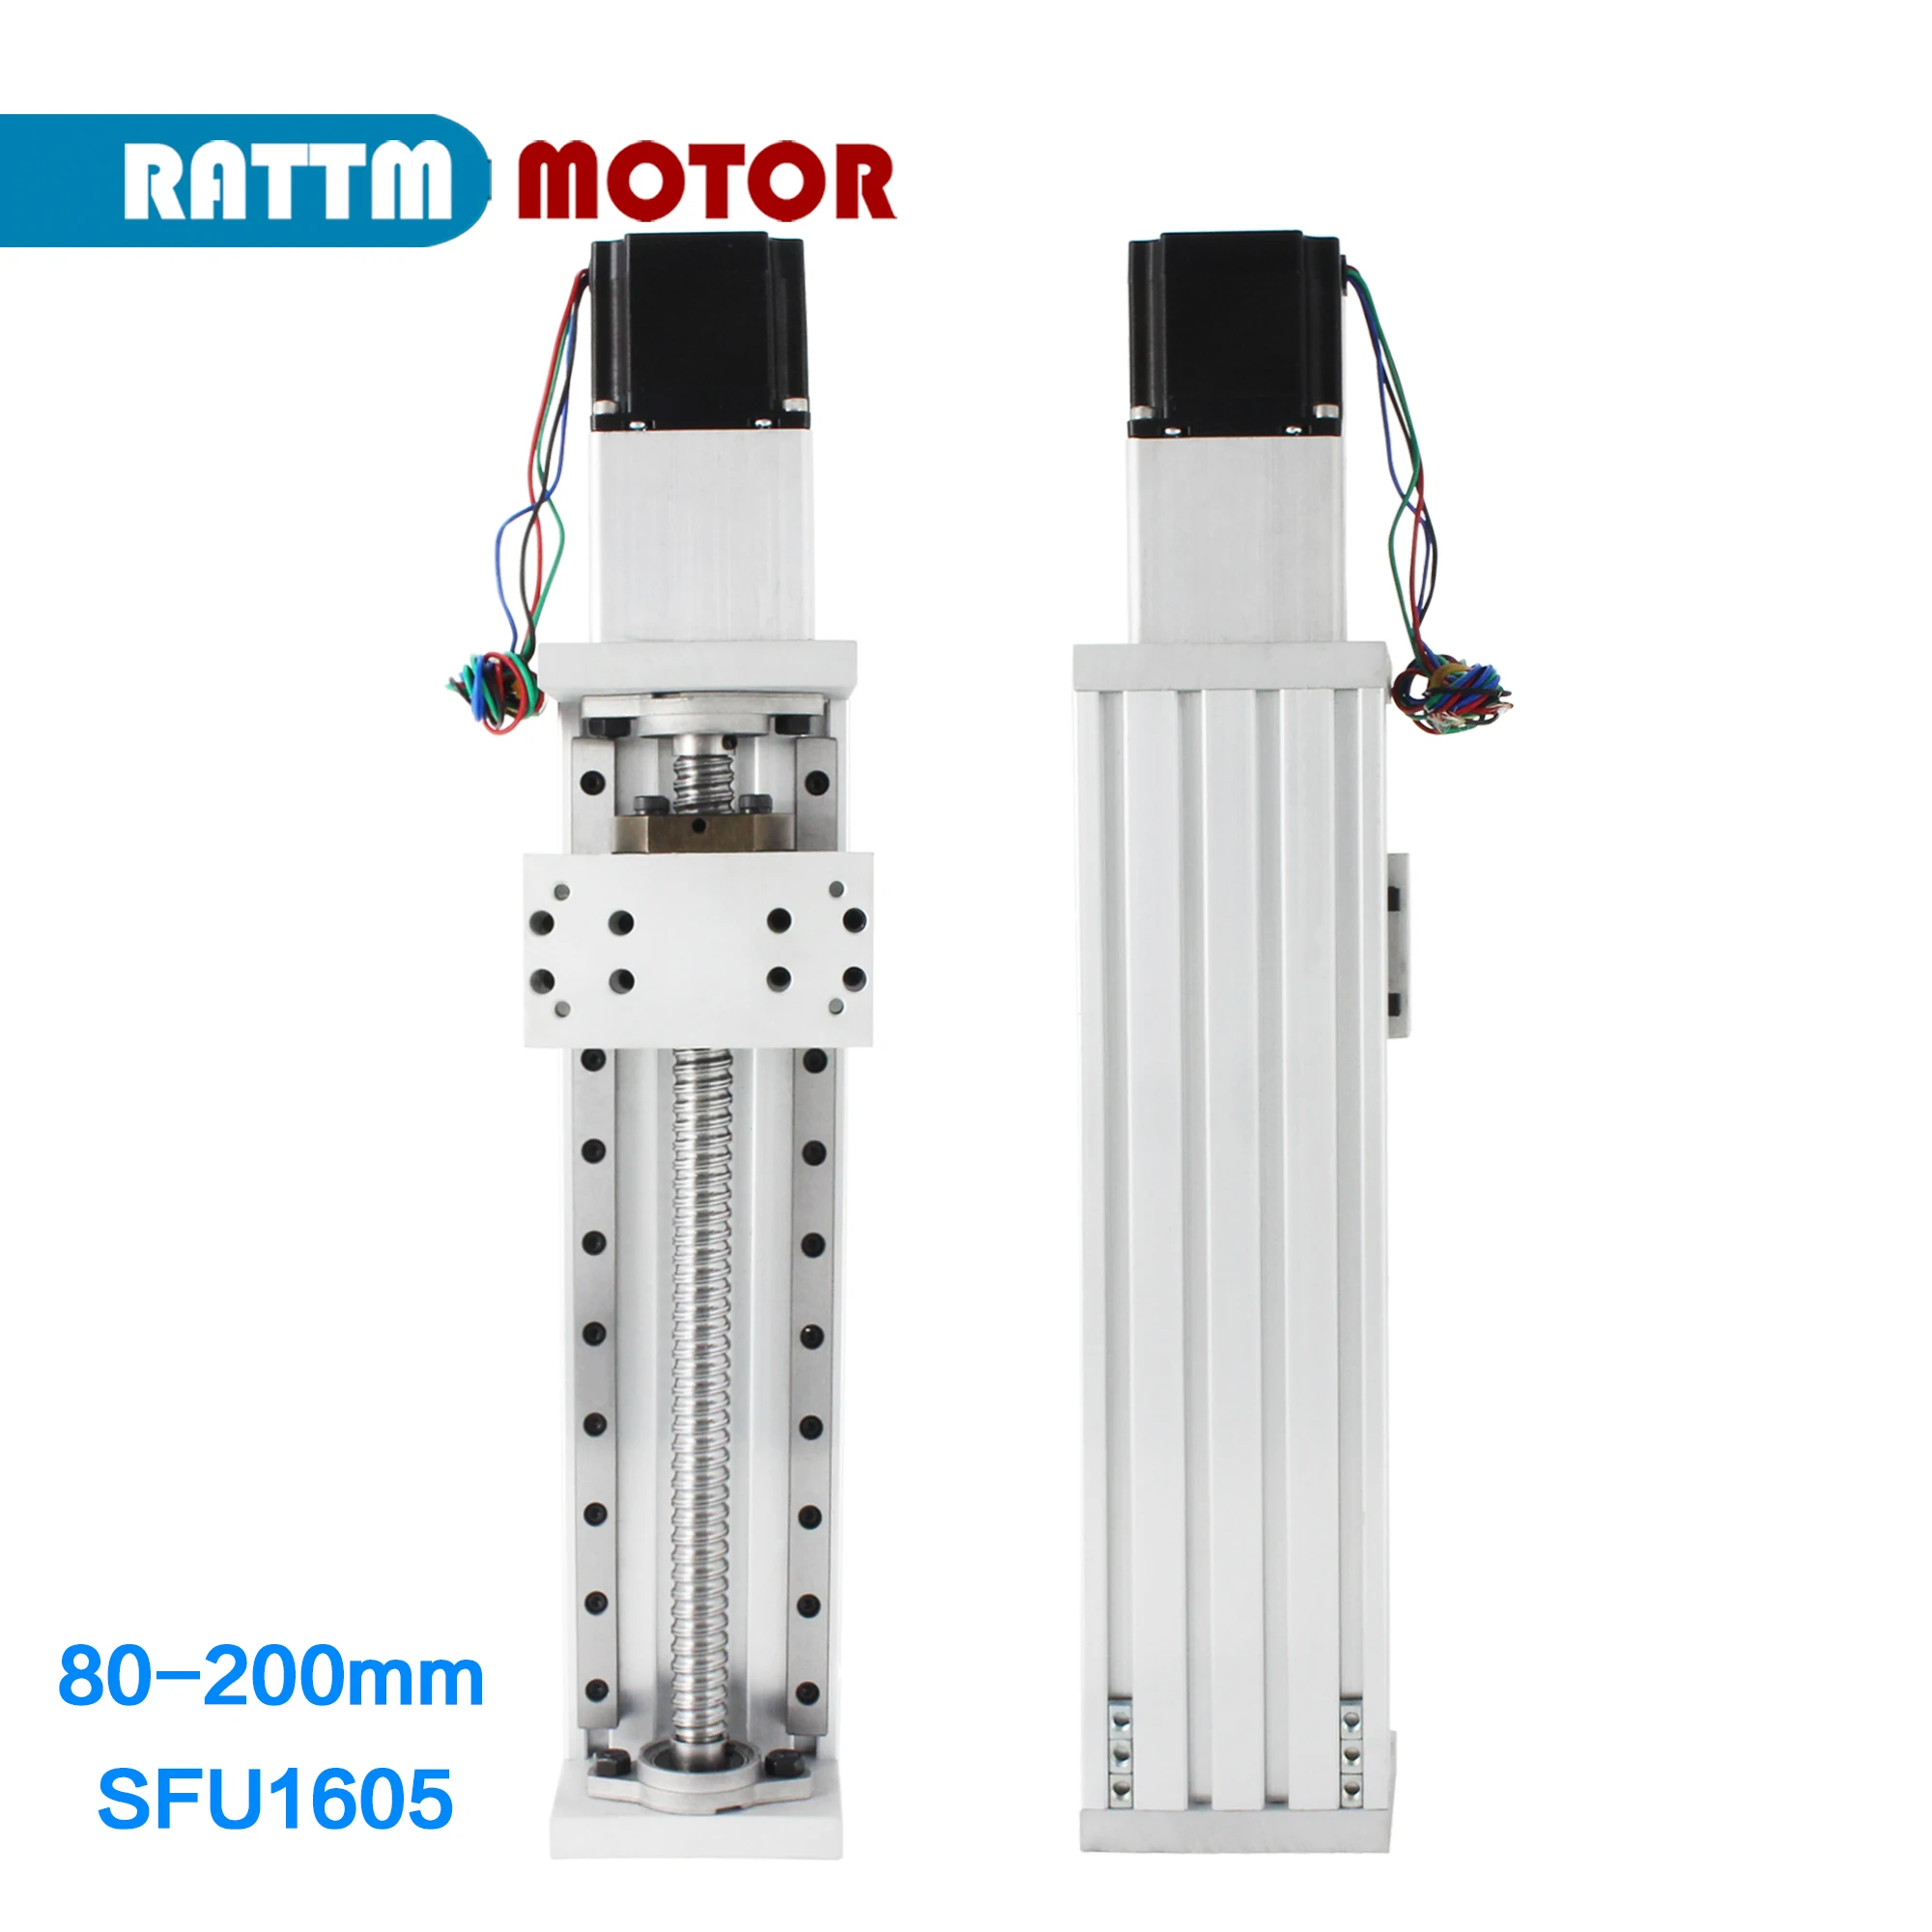 

CNC Linear Guide Actuator Stage Rail Motion Slide Table & SFU1605 Ball screw 200mm / 400mm Travel